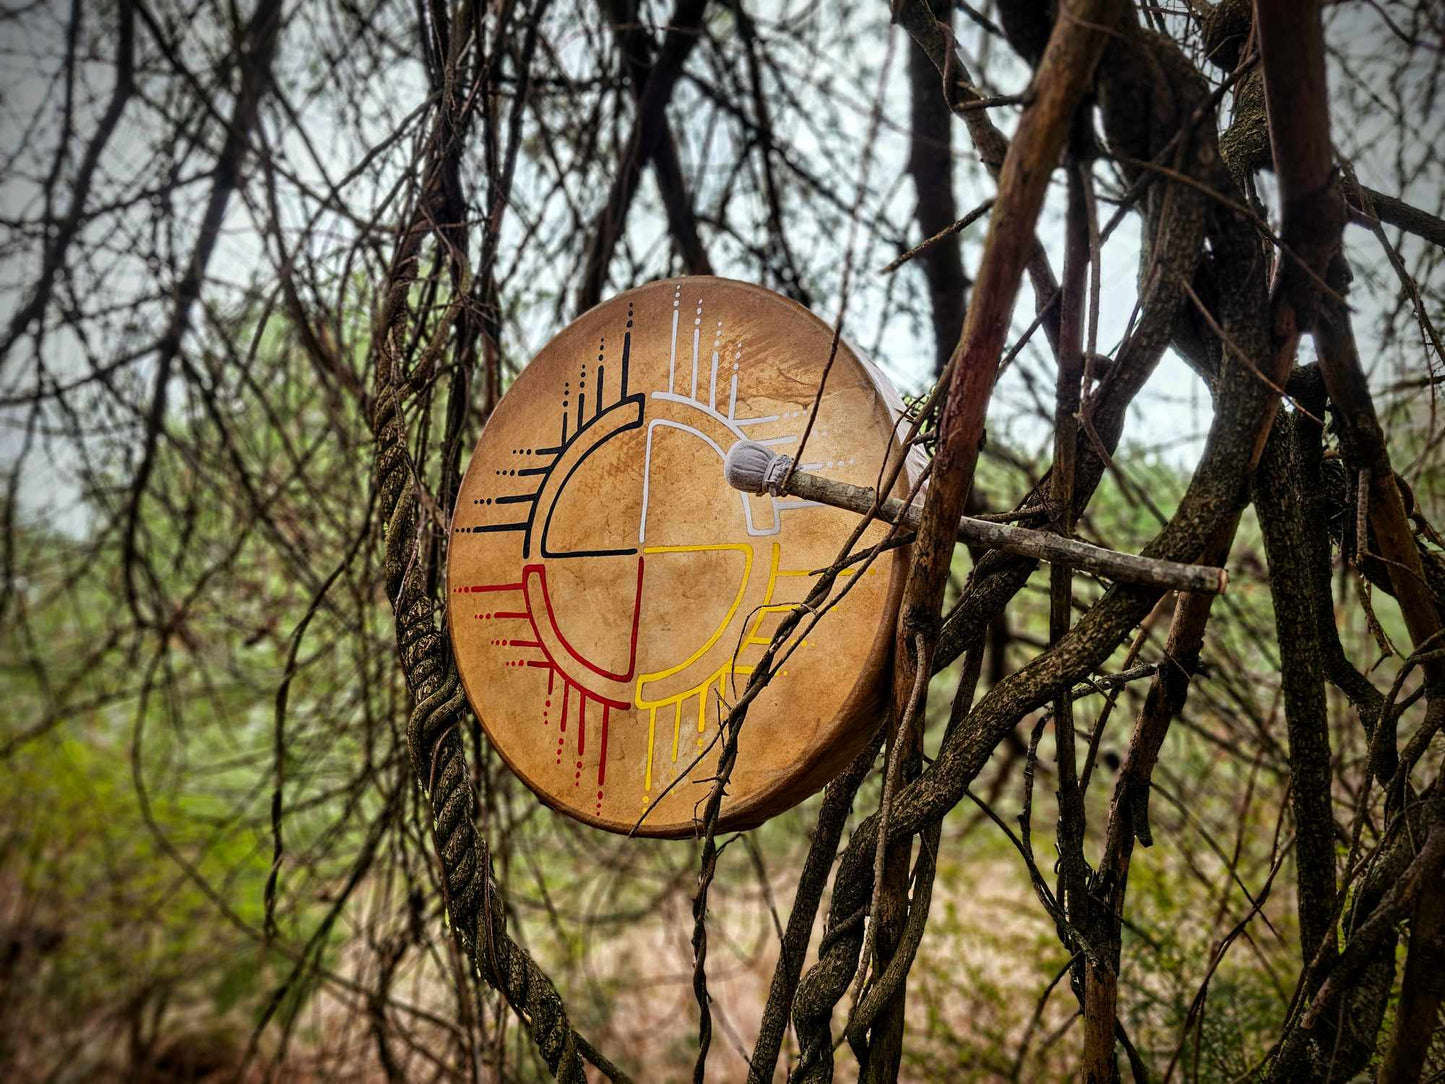 20" Bison Hide Drum With Beater | Hand Painted Four Directions Medicine Wheel Art